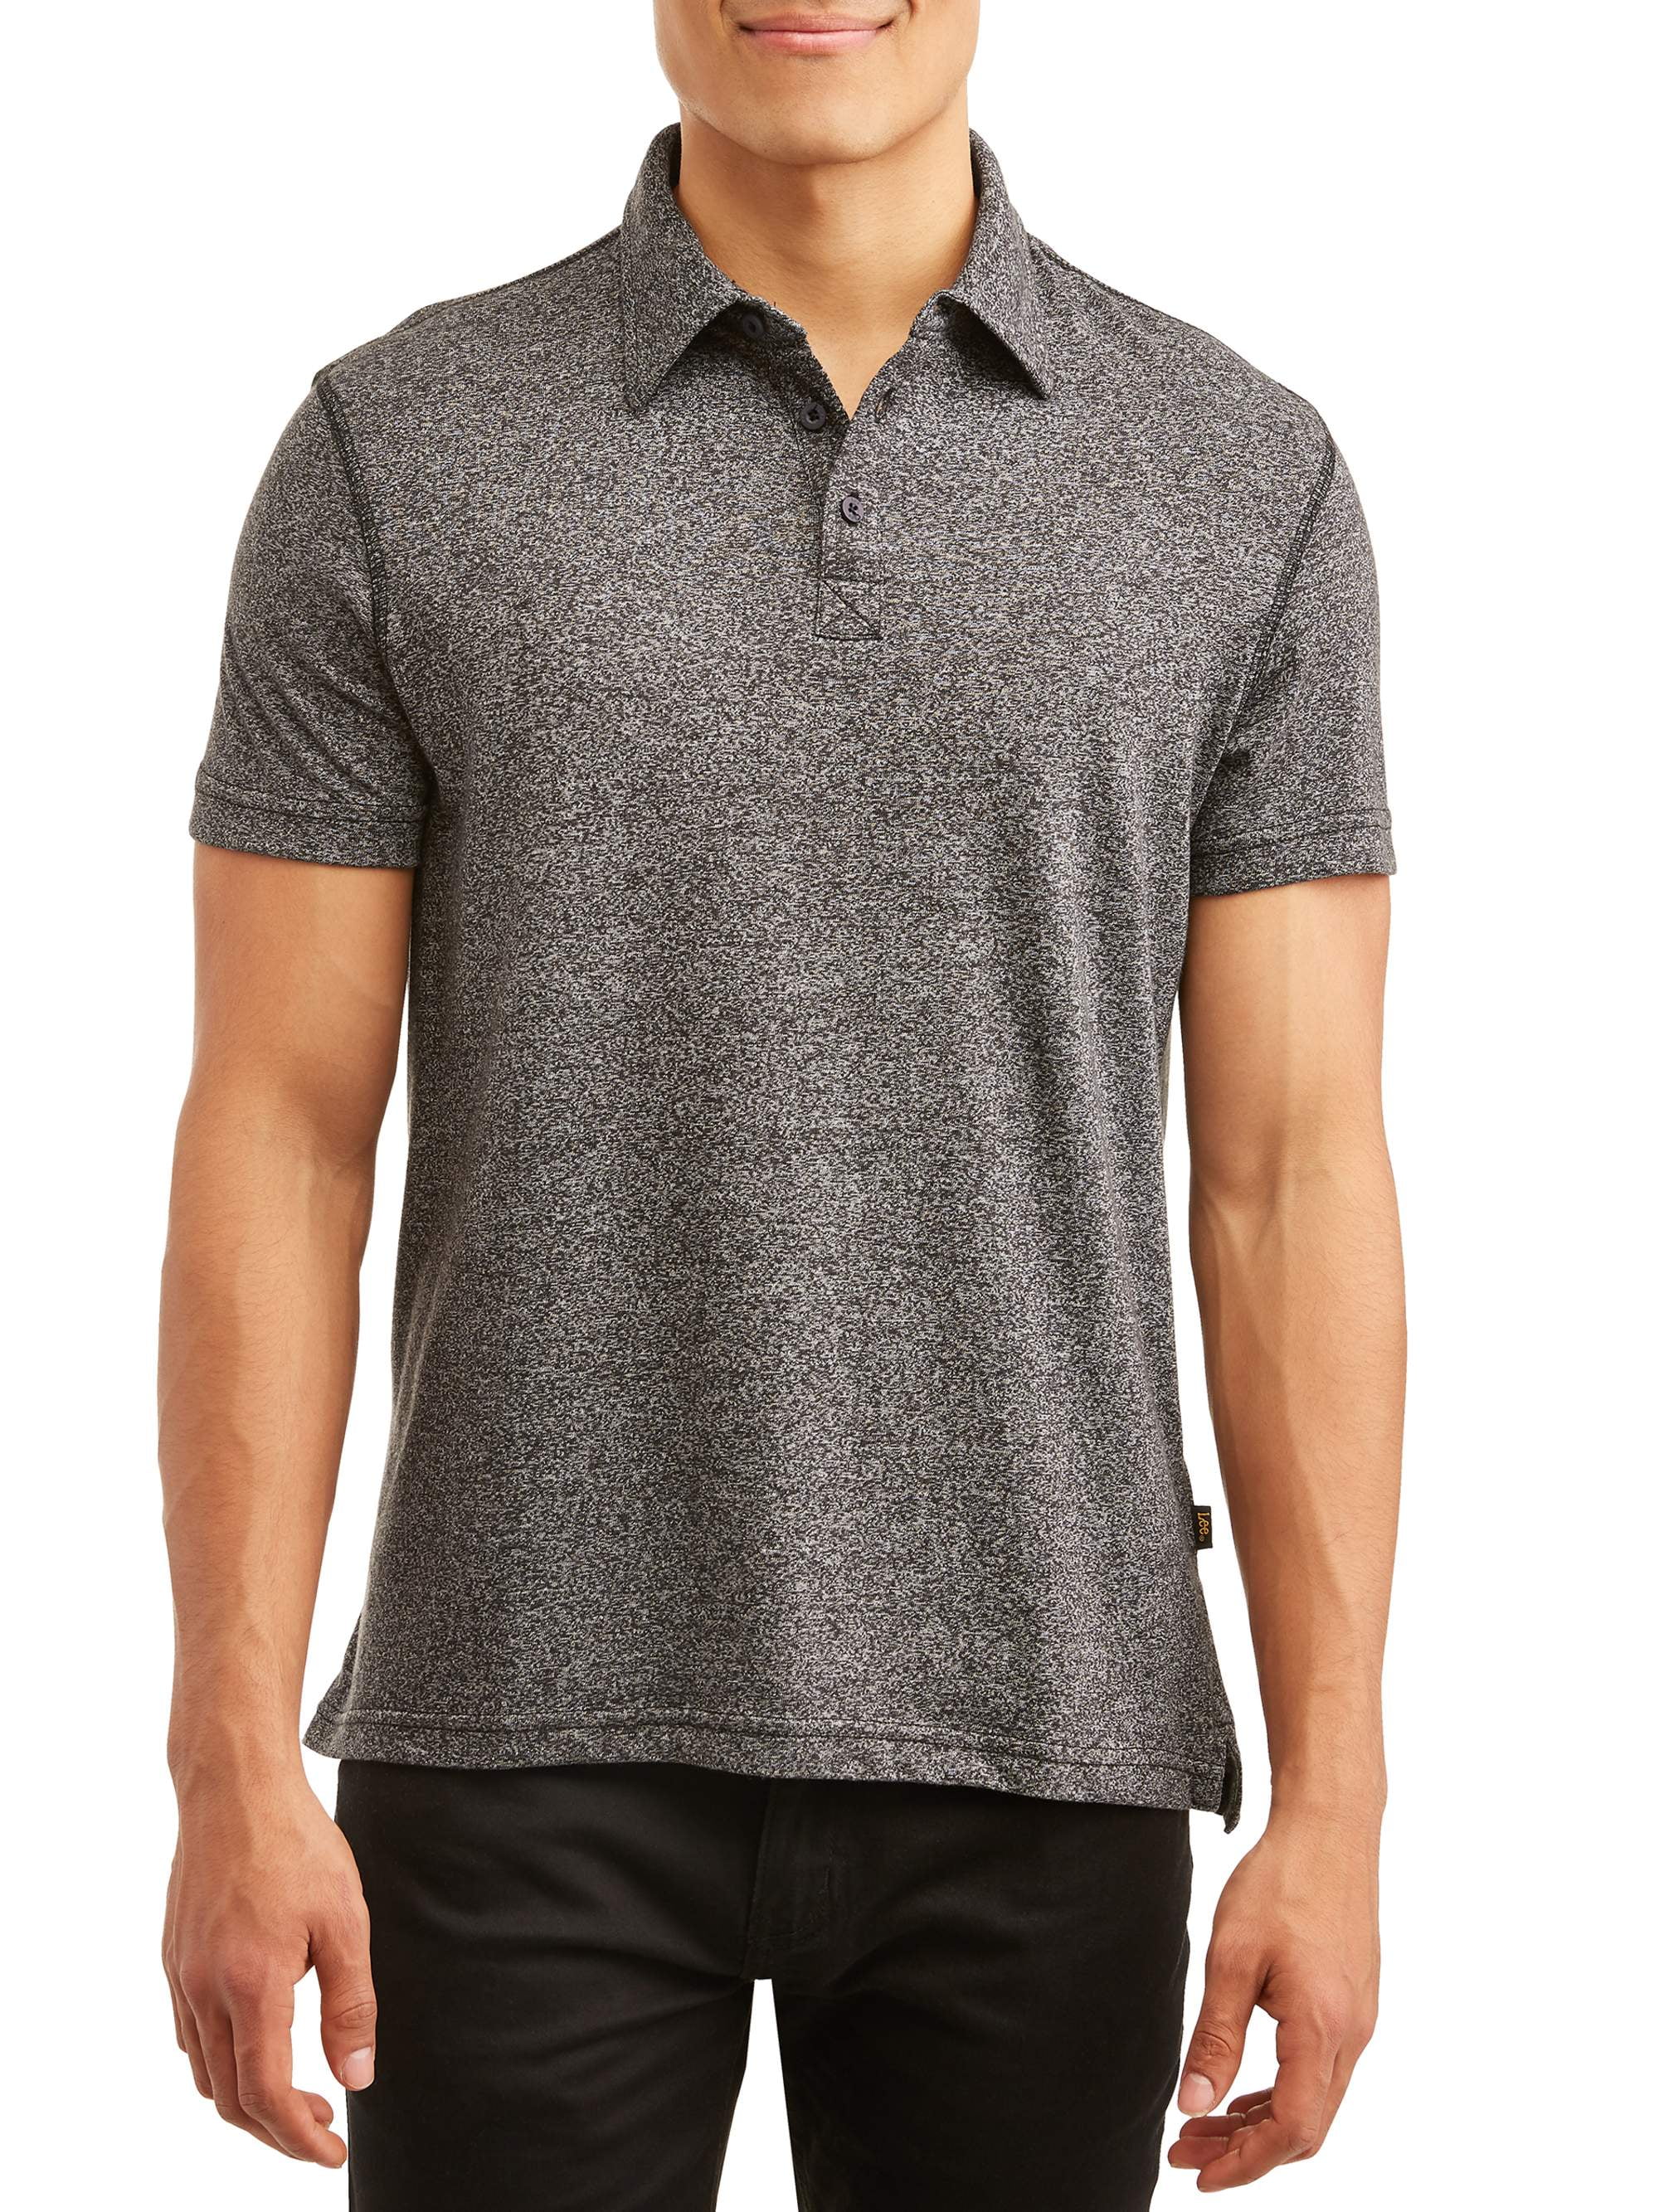 Lee Men's Short Sleeve Textured Knit Polo, Available Up To Size Xl ...